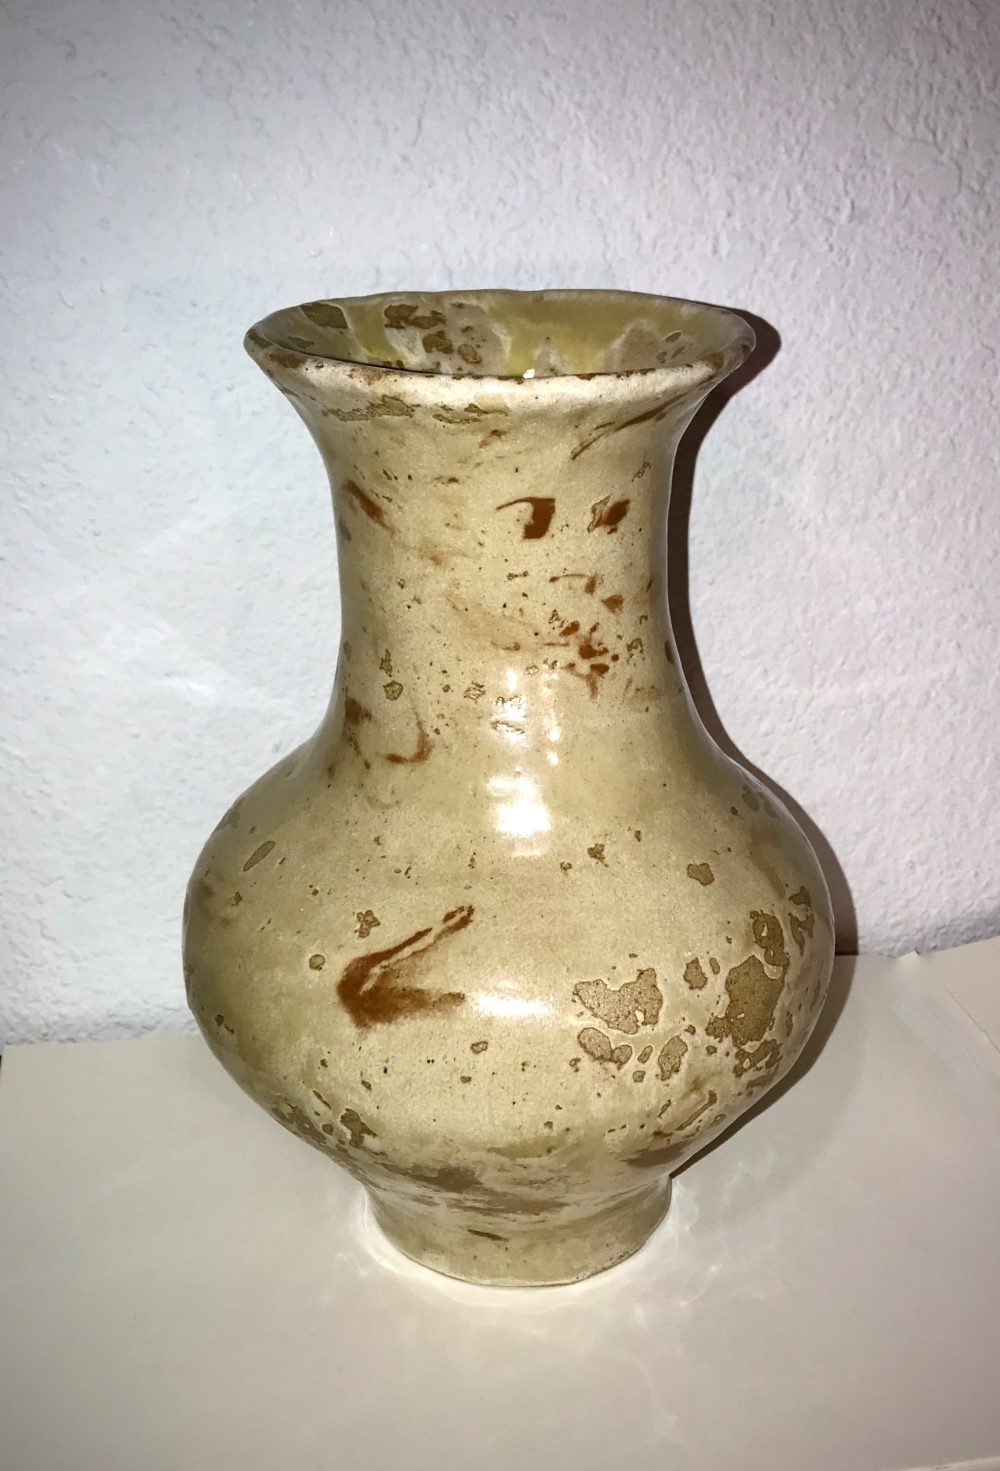 A tan, marbled vase that is wider towards the bottom, narrows at the neck, and flares at the top.